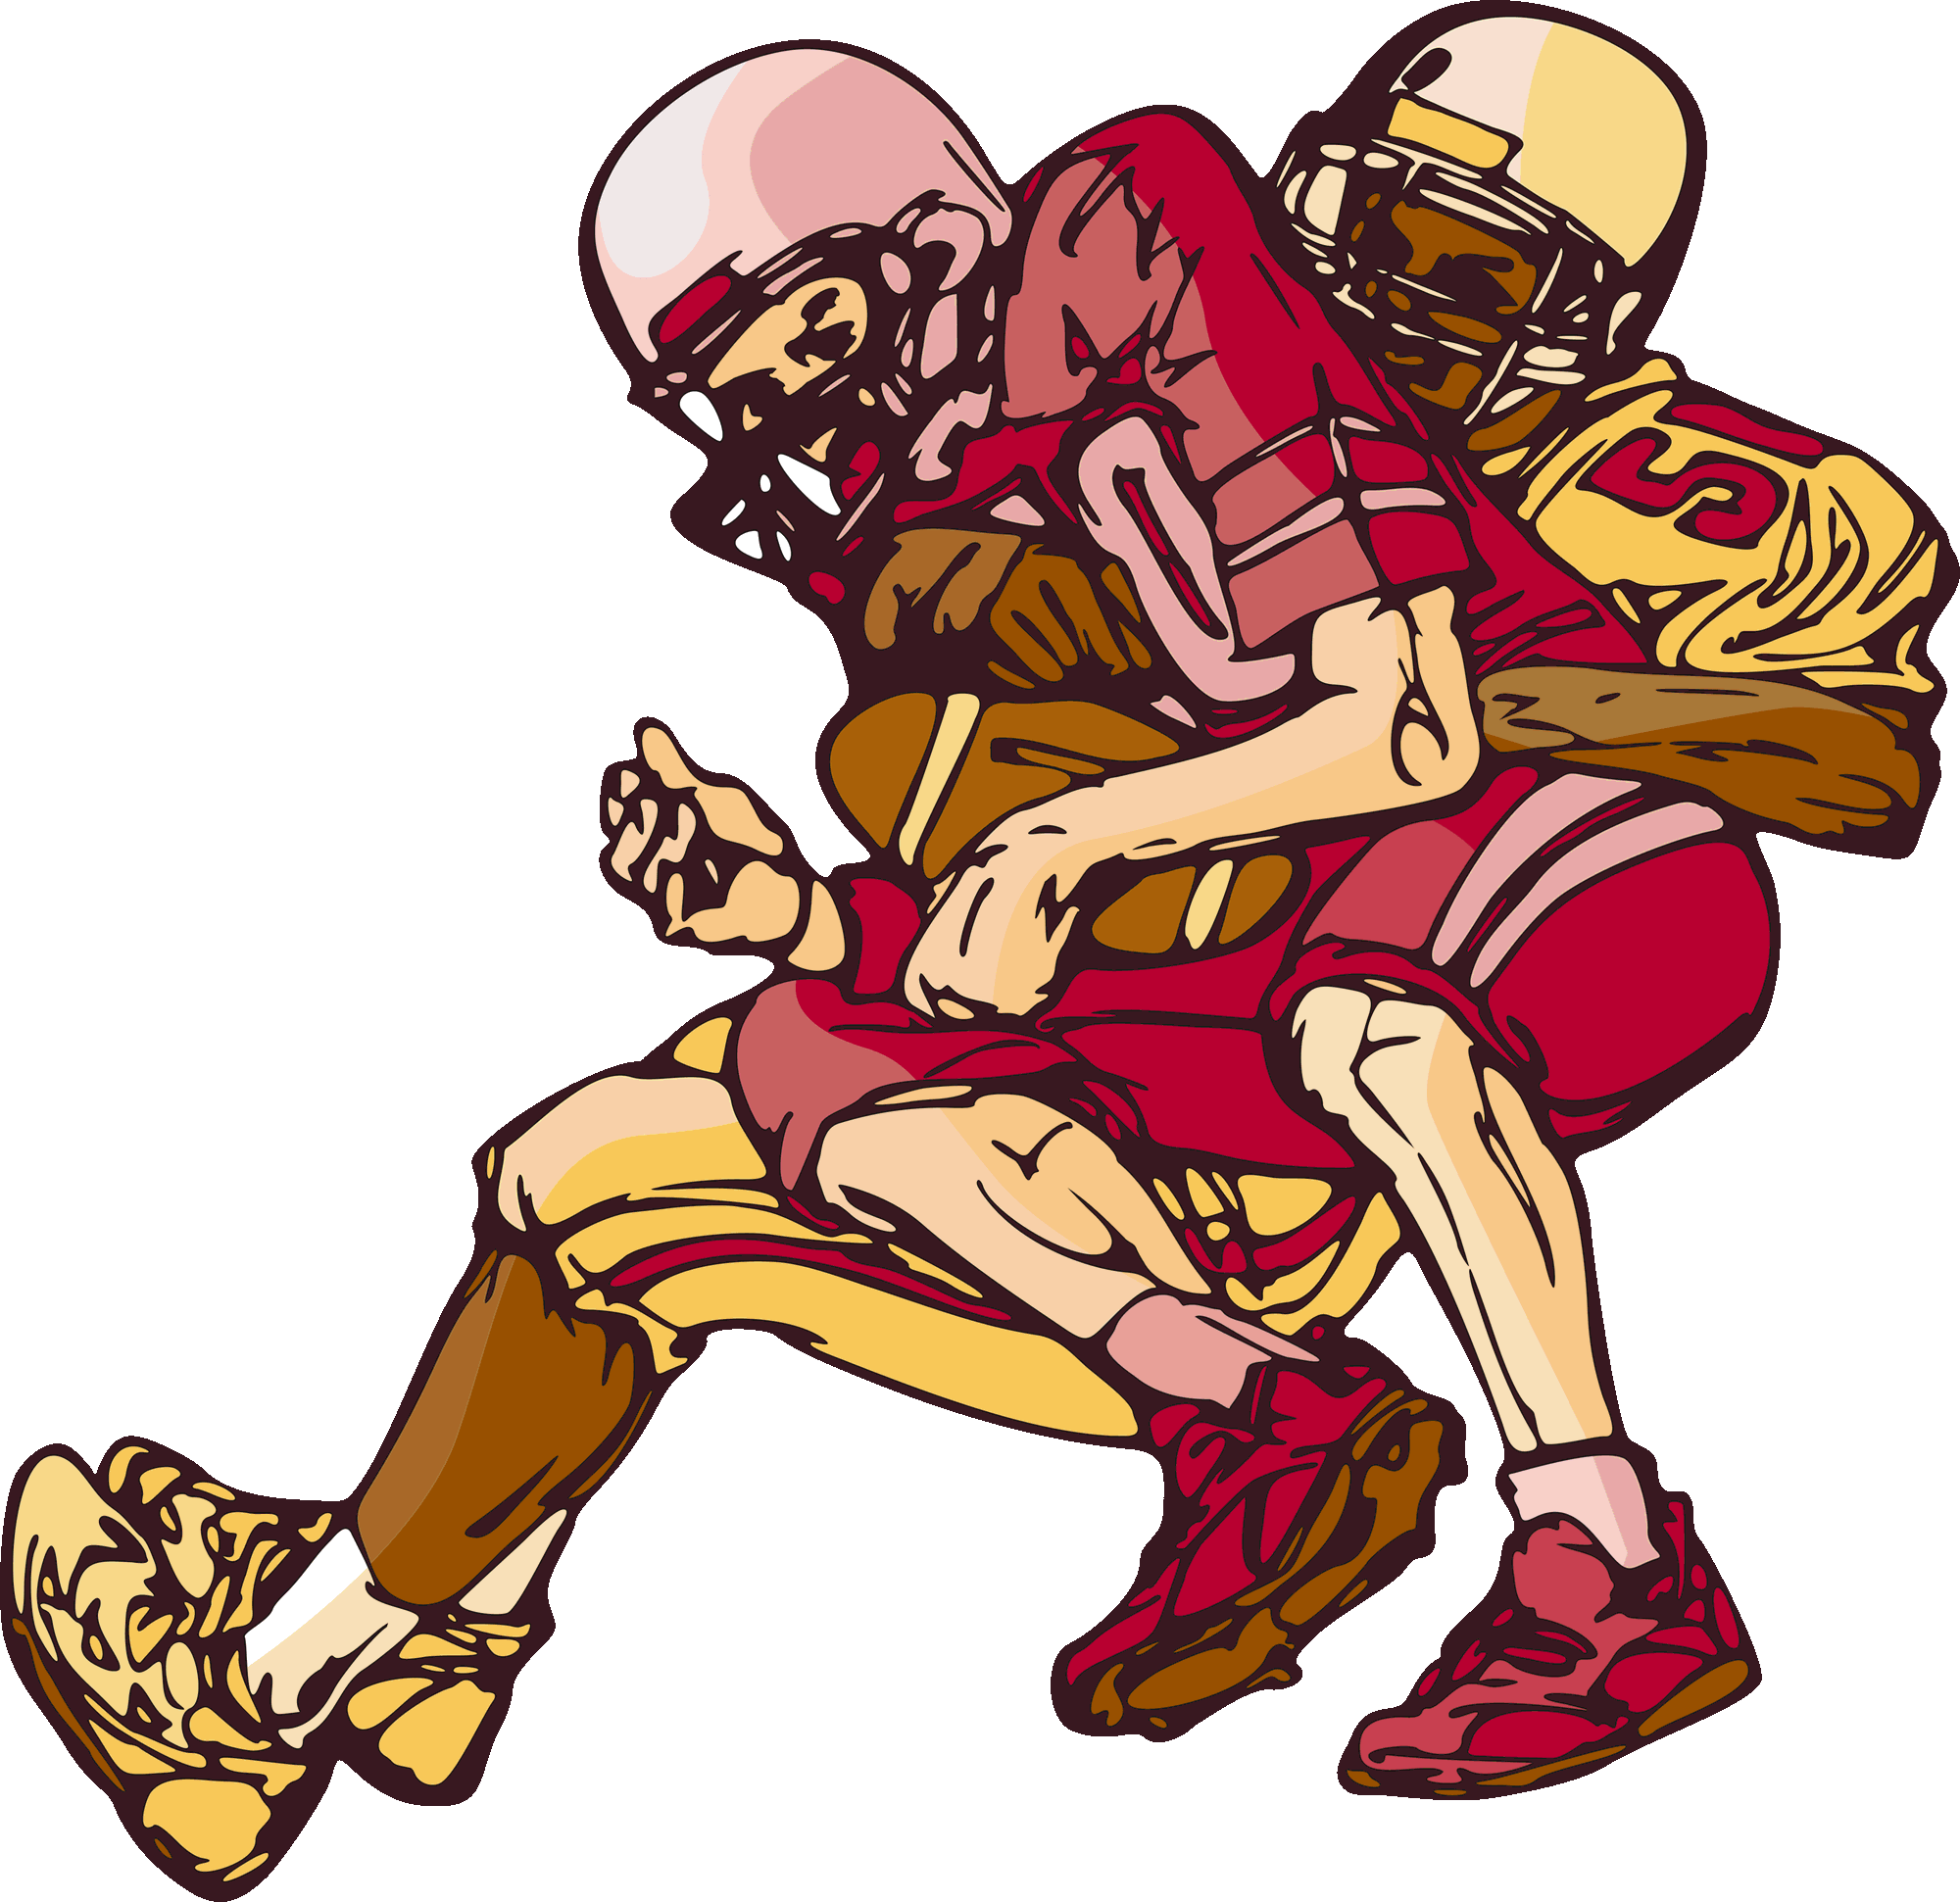 football game clipart free - photo #36